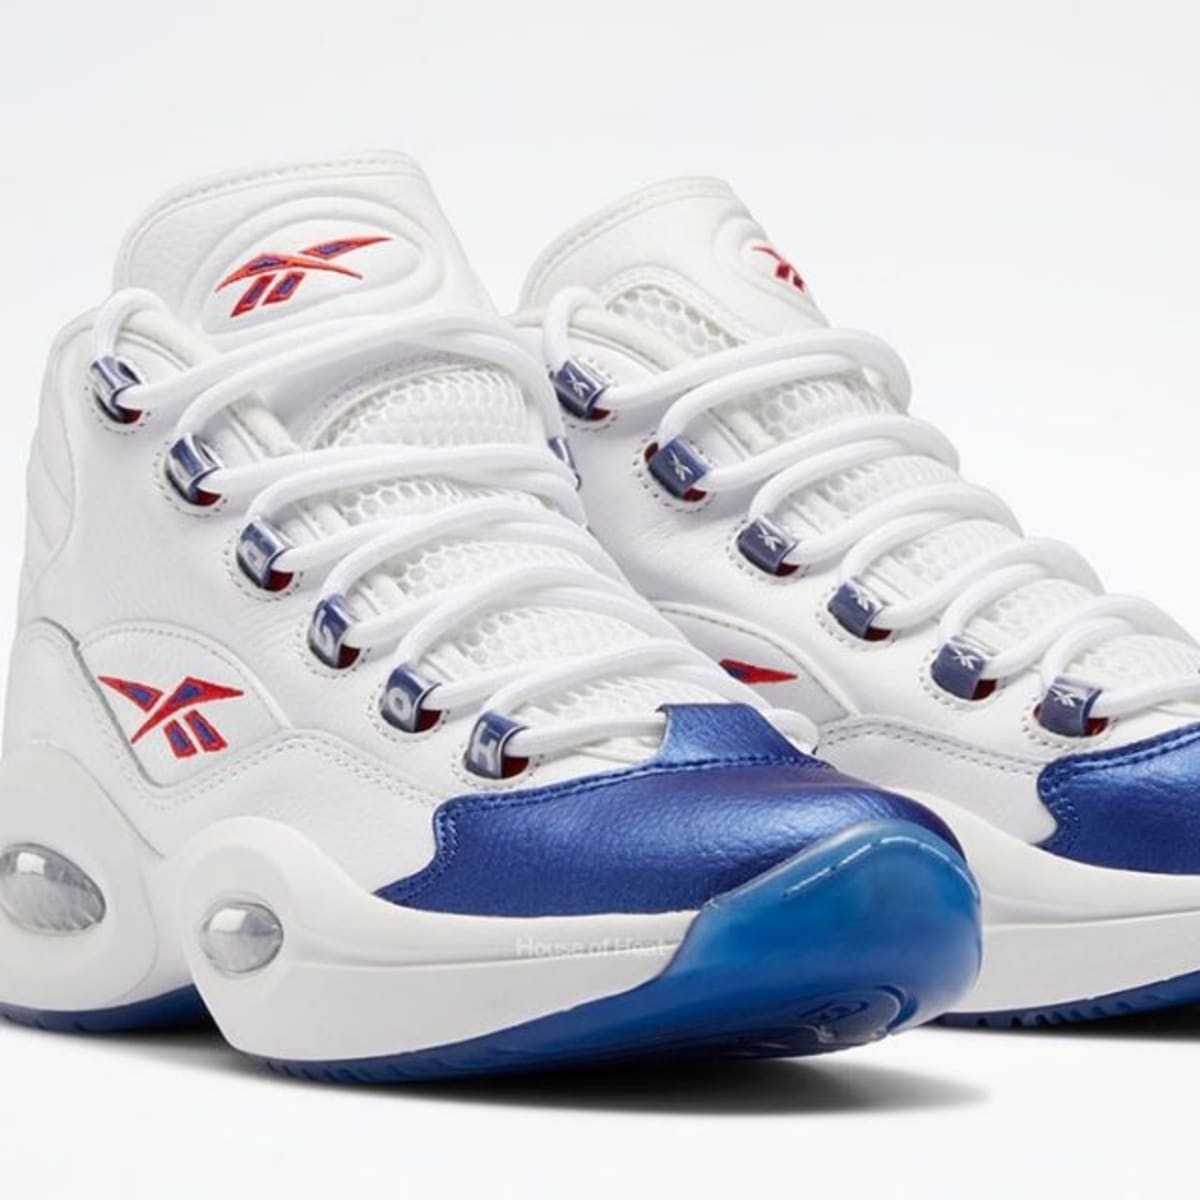 Reebok Question Mid 'Blue Toe' Release Information - Sports Illustrated FanNation Kicks Analysis and More